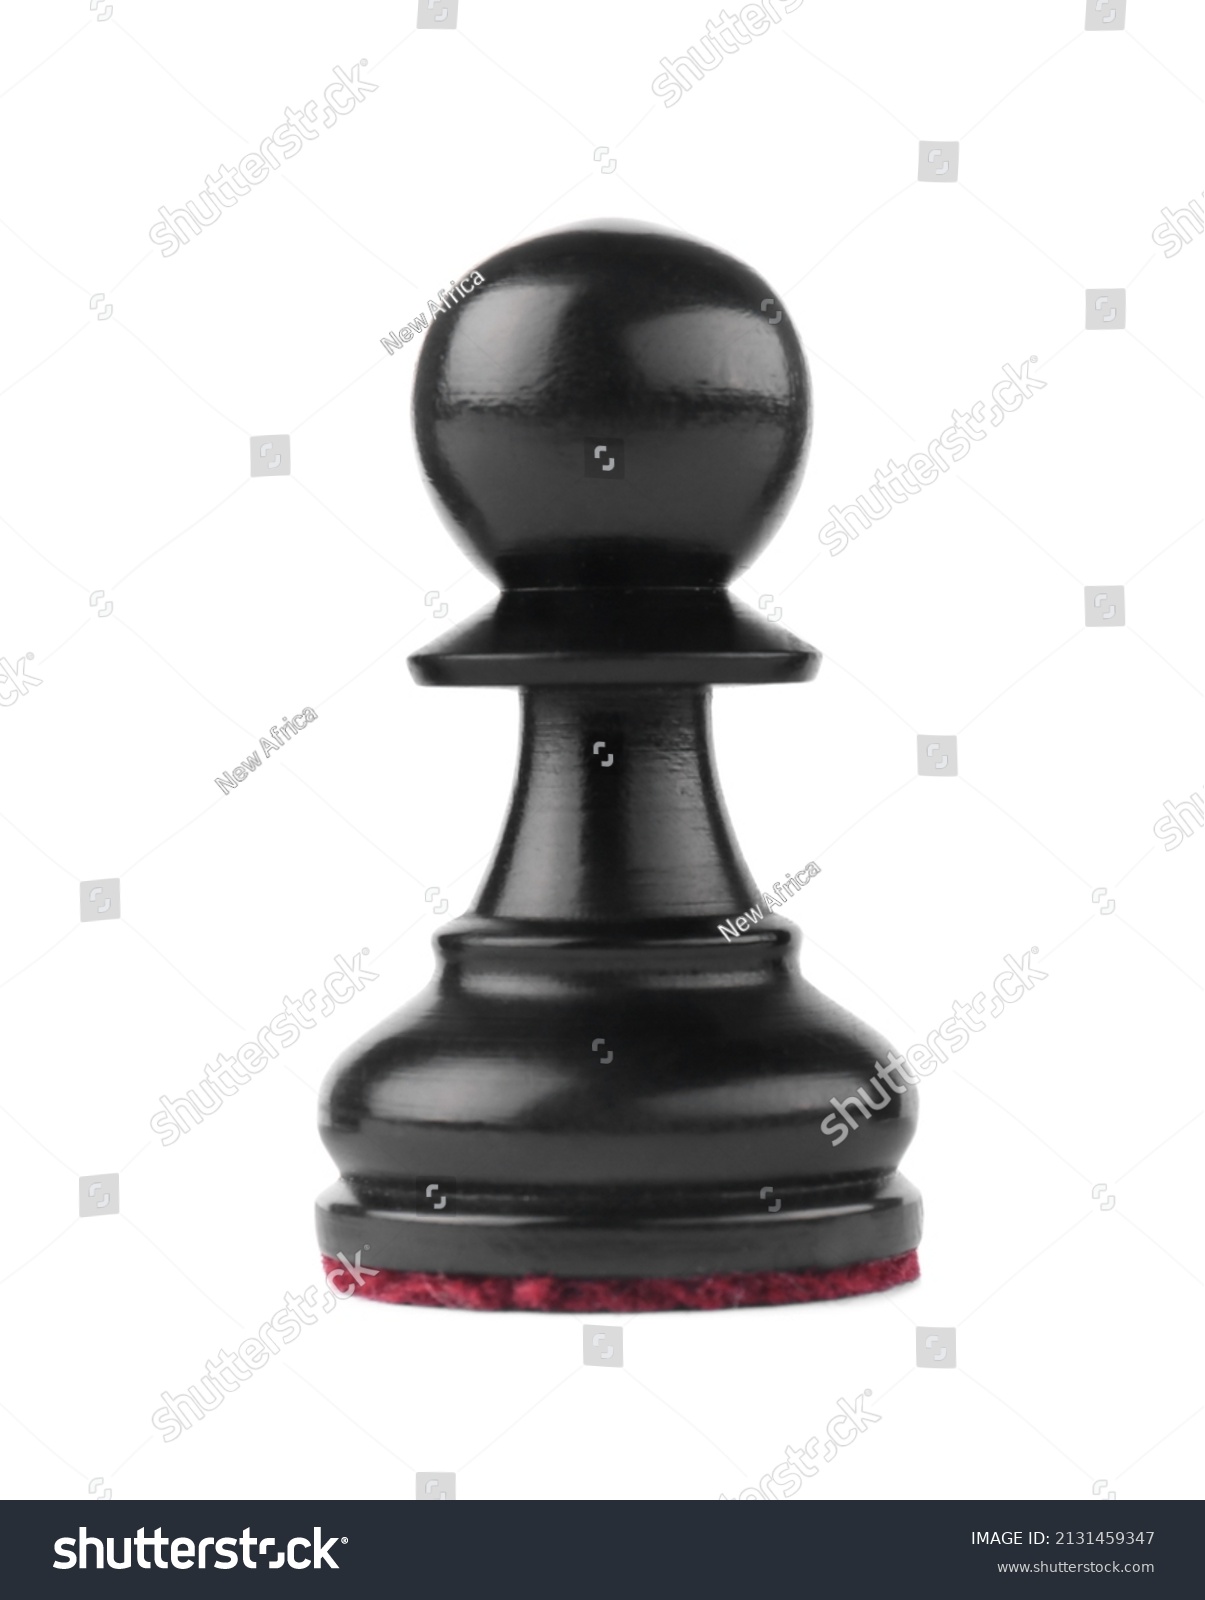 Wooden Pawn chess piece on white background #2131459347